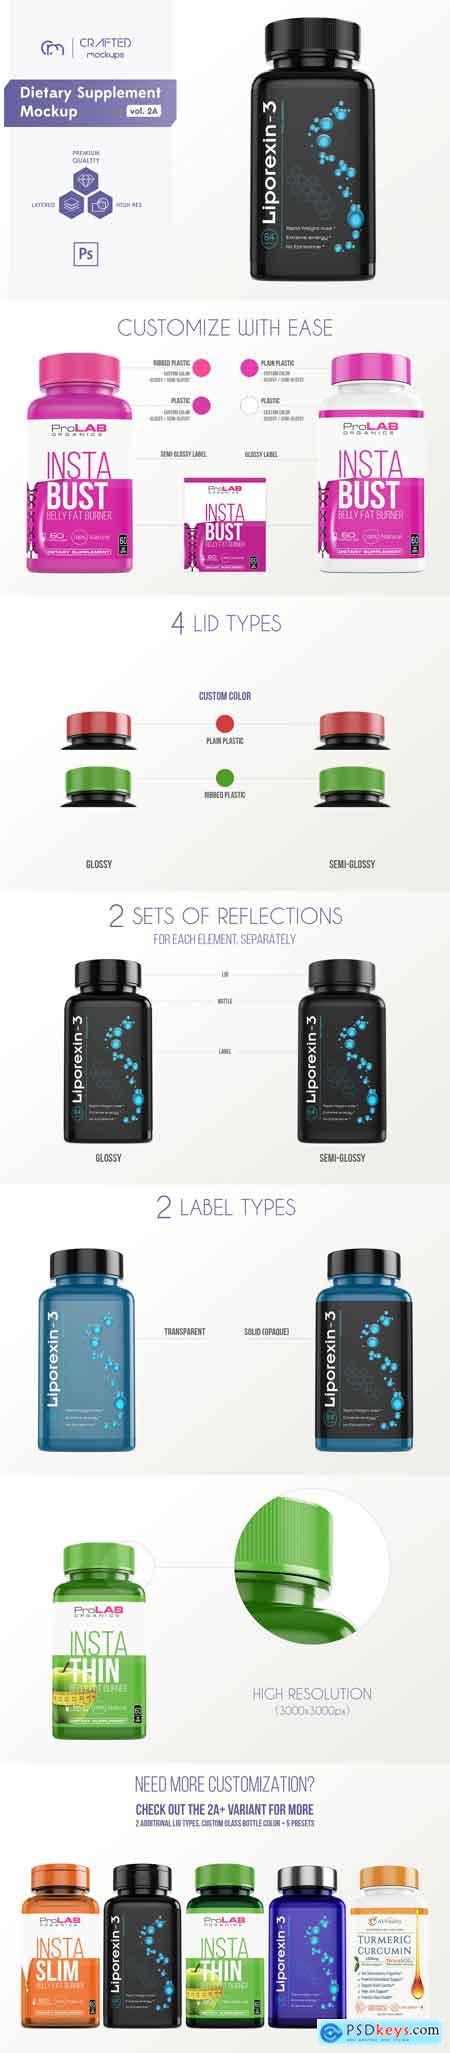 Dietary Supplement Mockup v 2A